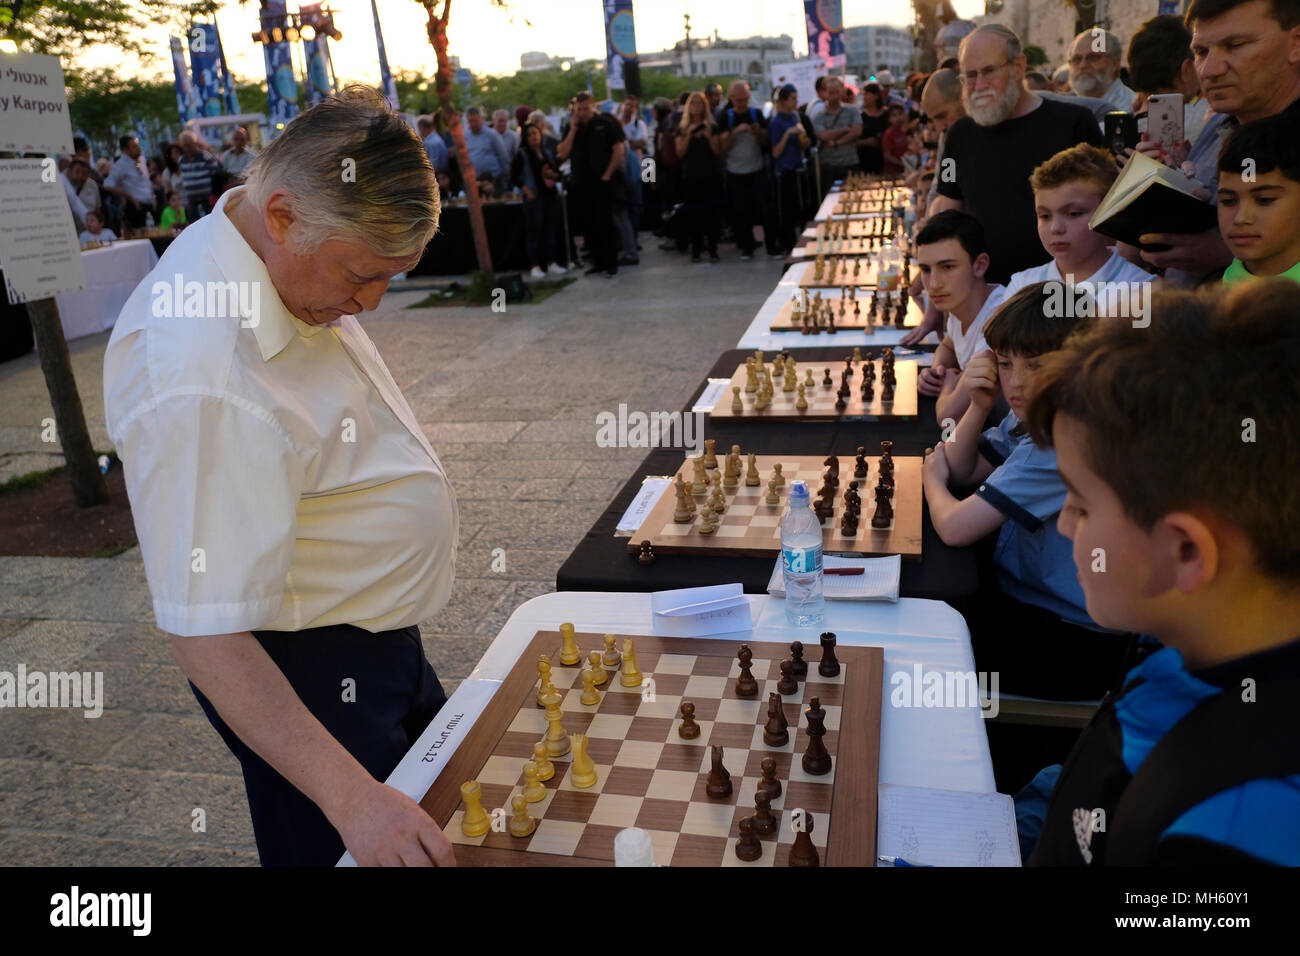 Jerusalem, Israel 30th April 2018. Russian State Duma member, chess grandmaster and former World Champion Anatoly Yevgenyevich Karpov giving a simultaneous exhibition with young Israeli participants during a simul display marking Israel's 70th anniversary in Jerusalem Stock Photo